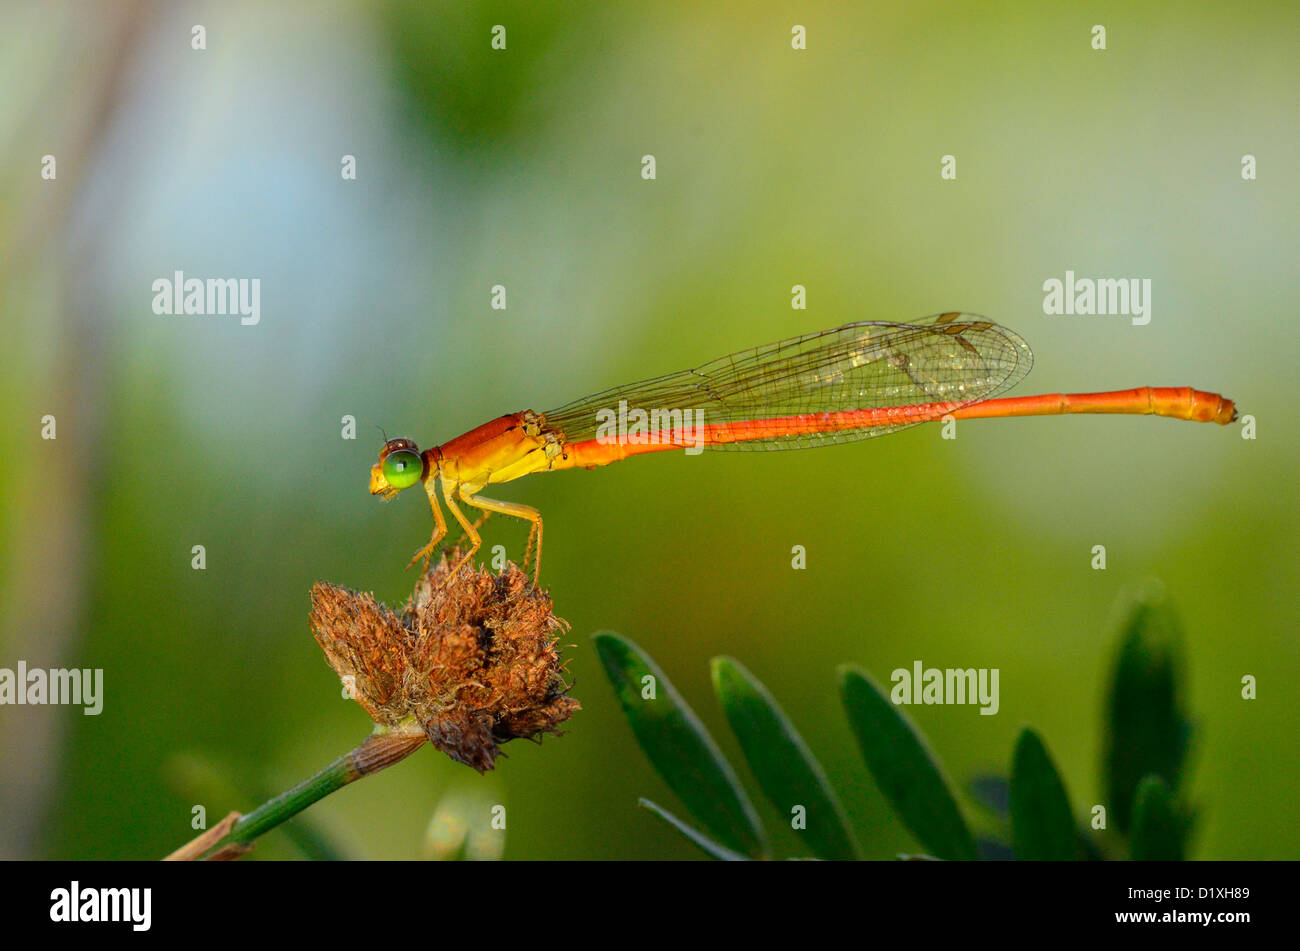 Damselfly on twig, Western Cape, South Africa Stock Photo